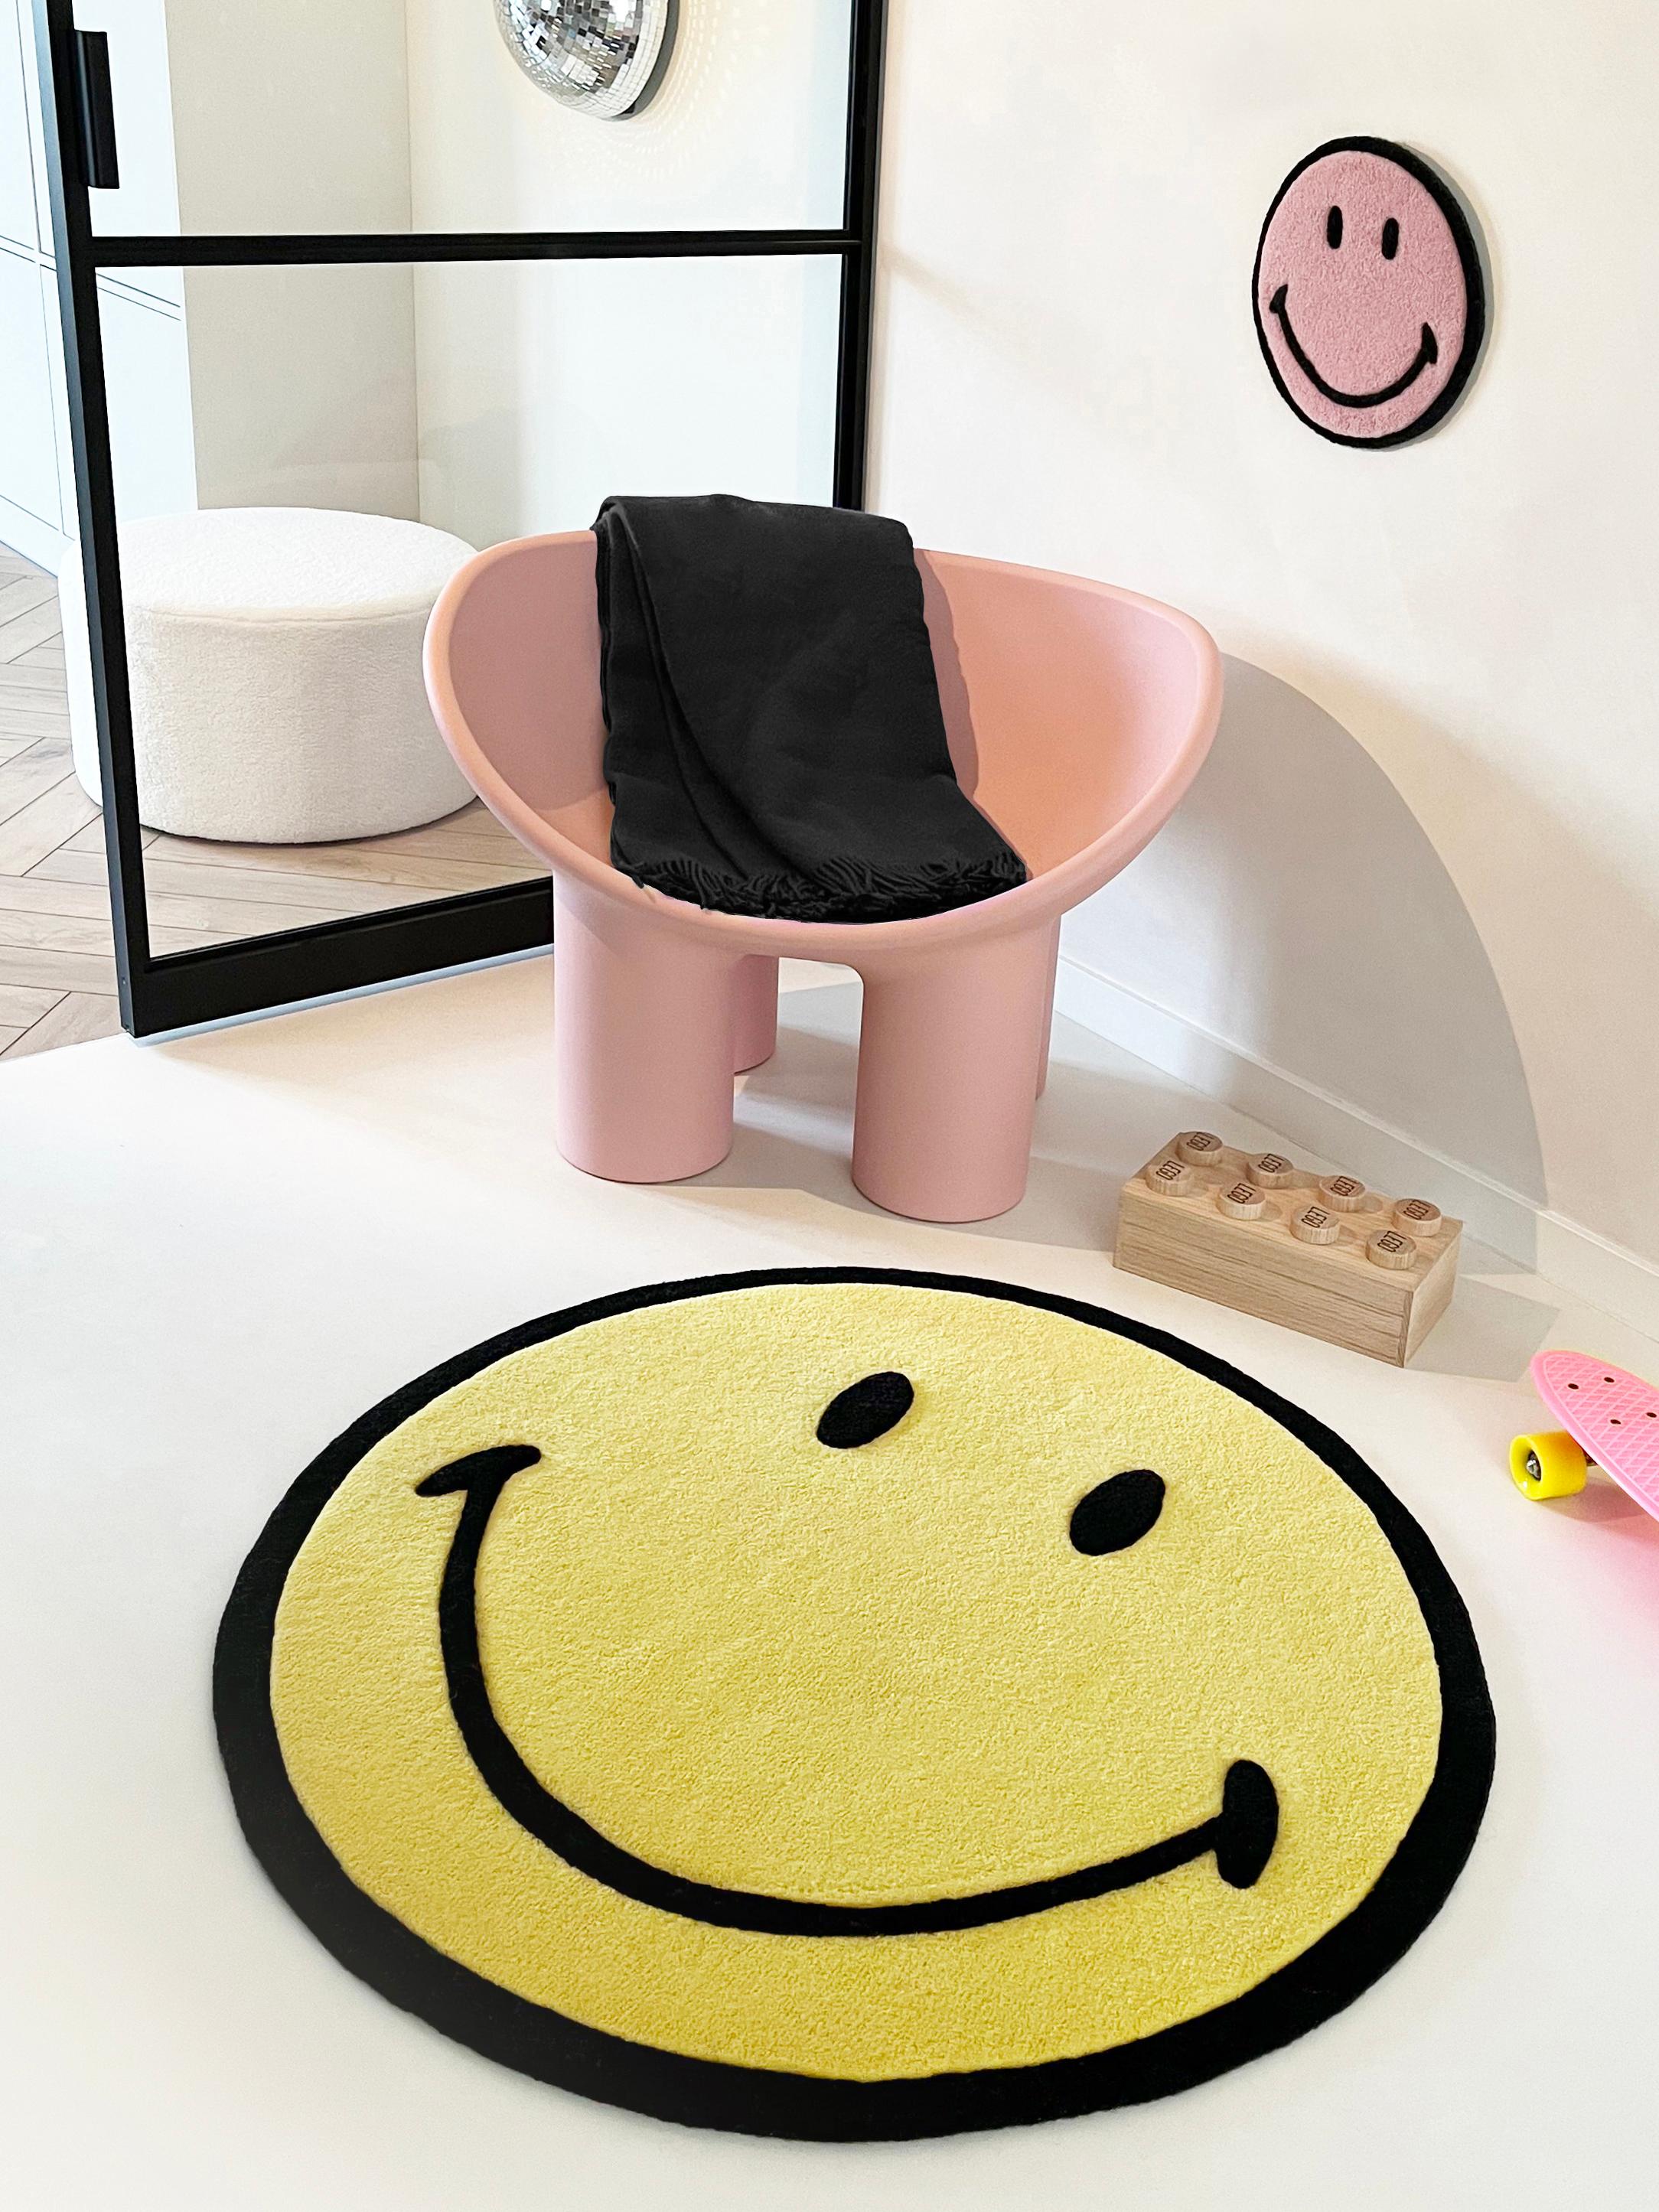 We teamed up with world's happiest lifestyle brand Smiley® on an exclusive rug collection. The iconic Smiley®, that celebrates its 50th anniversary this year, is translated into a super-soft and above all super-fun series of rugs. 

The Smiley® Rug